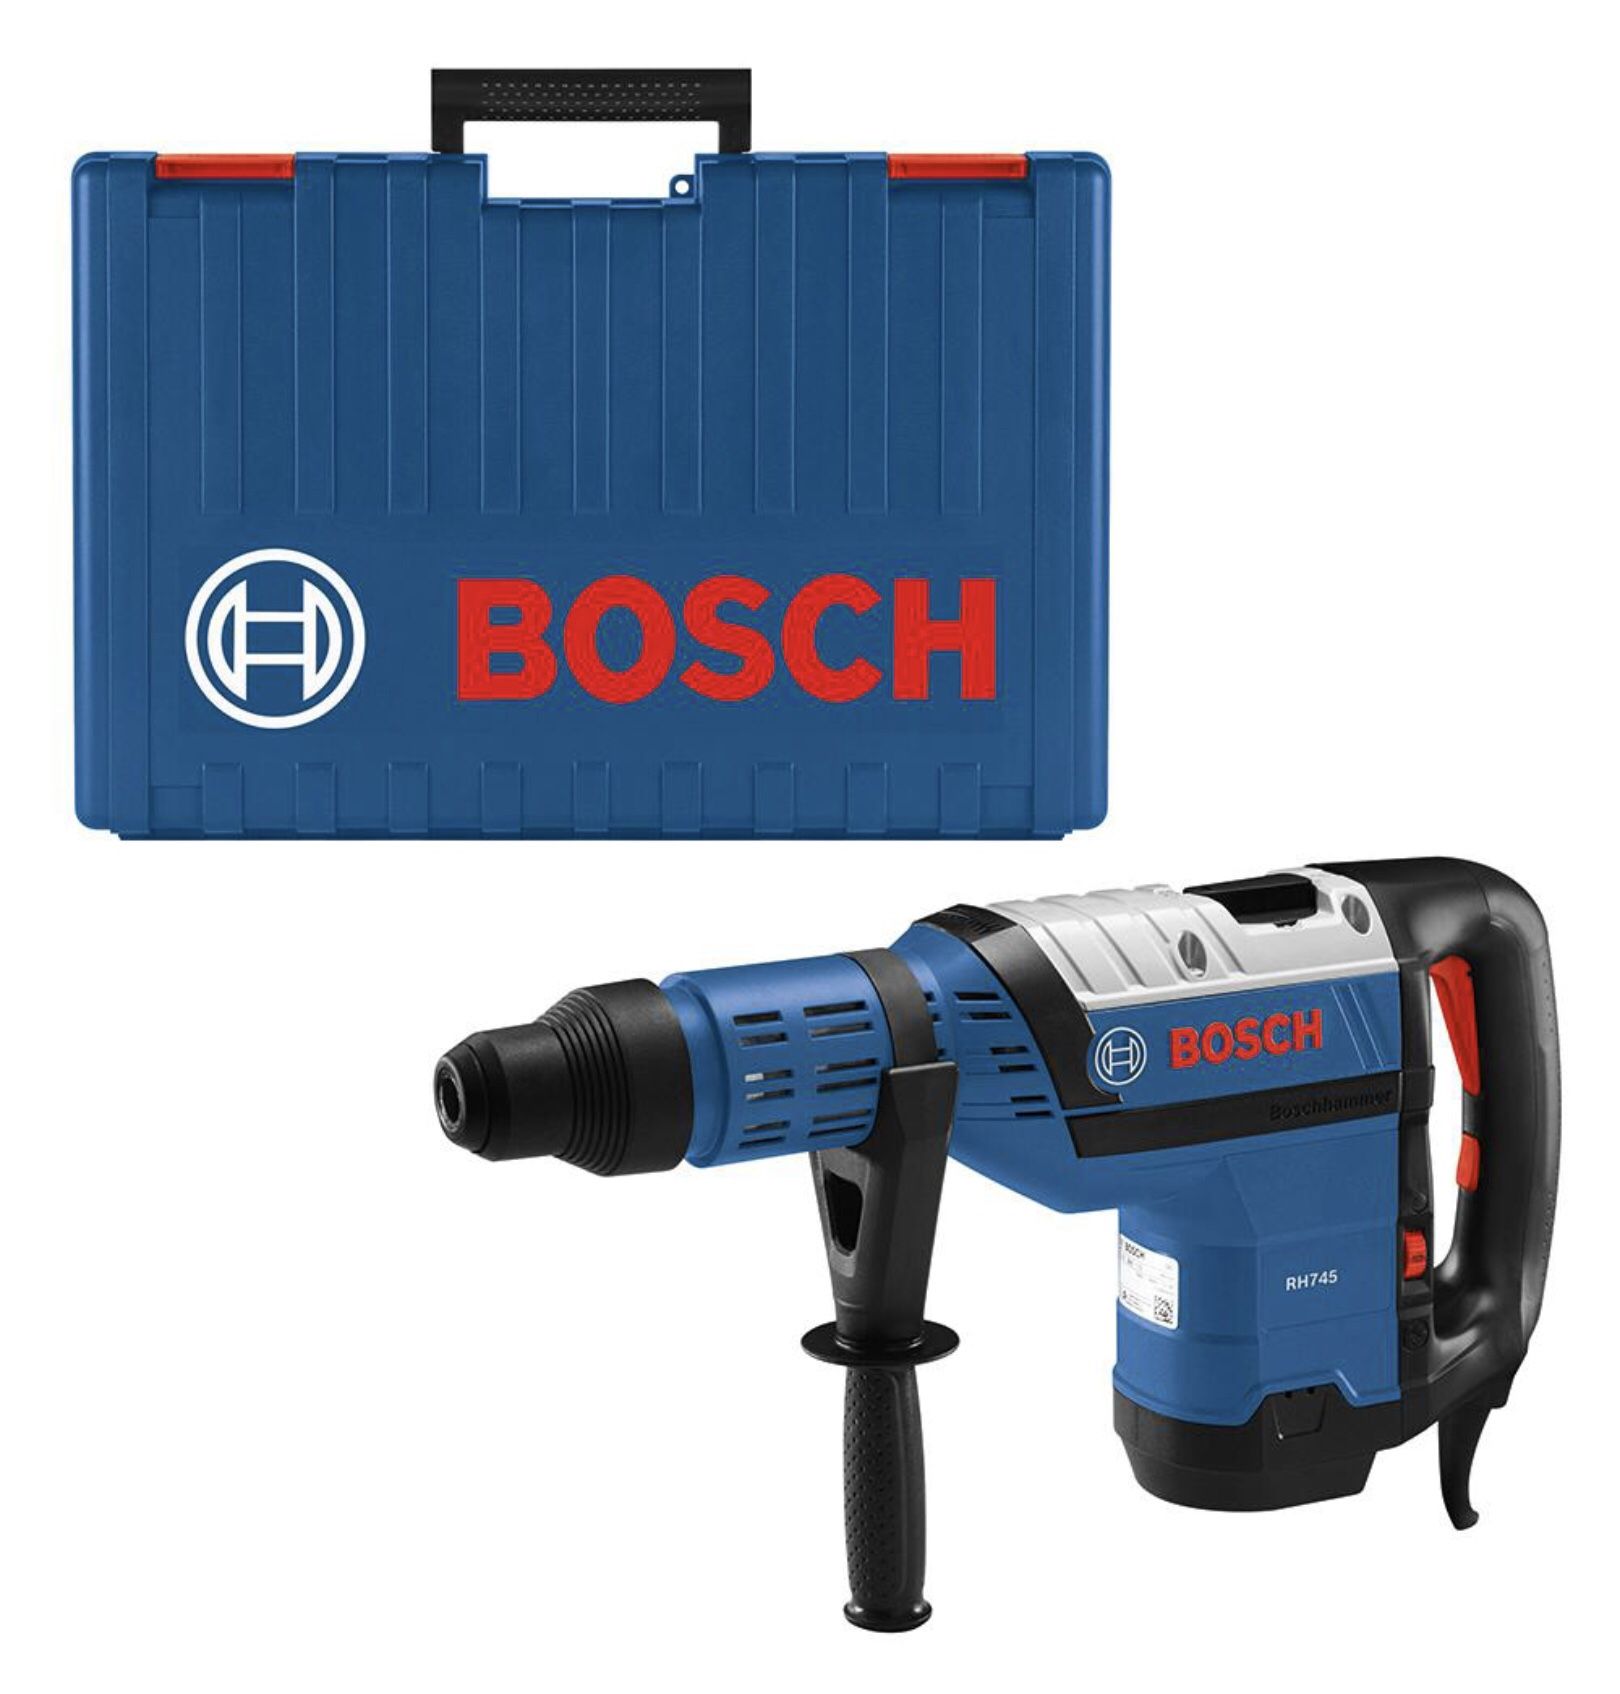 Bosch RH745 13.5 Amp 1-3/4 in. Corded Variable Speed SDS-Max Concrete/Masonry Rotary Hammer Drill